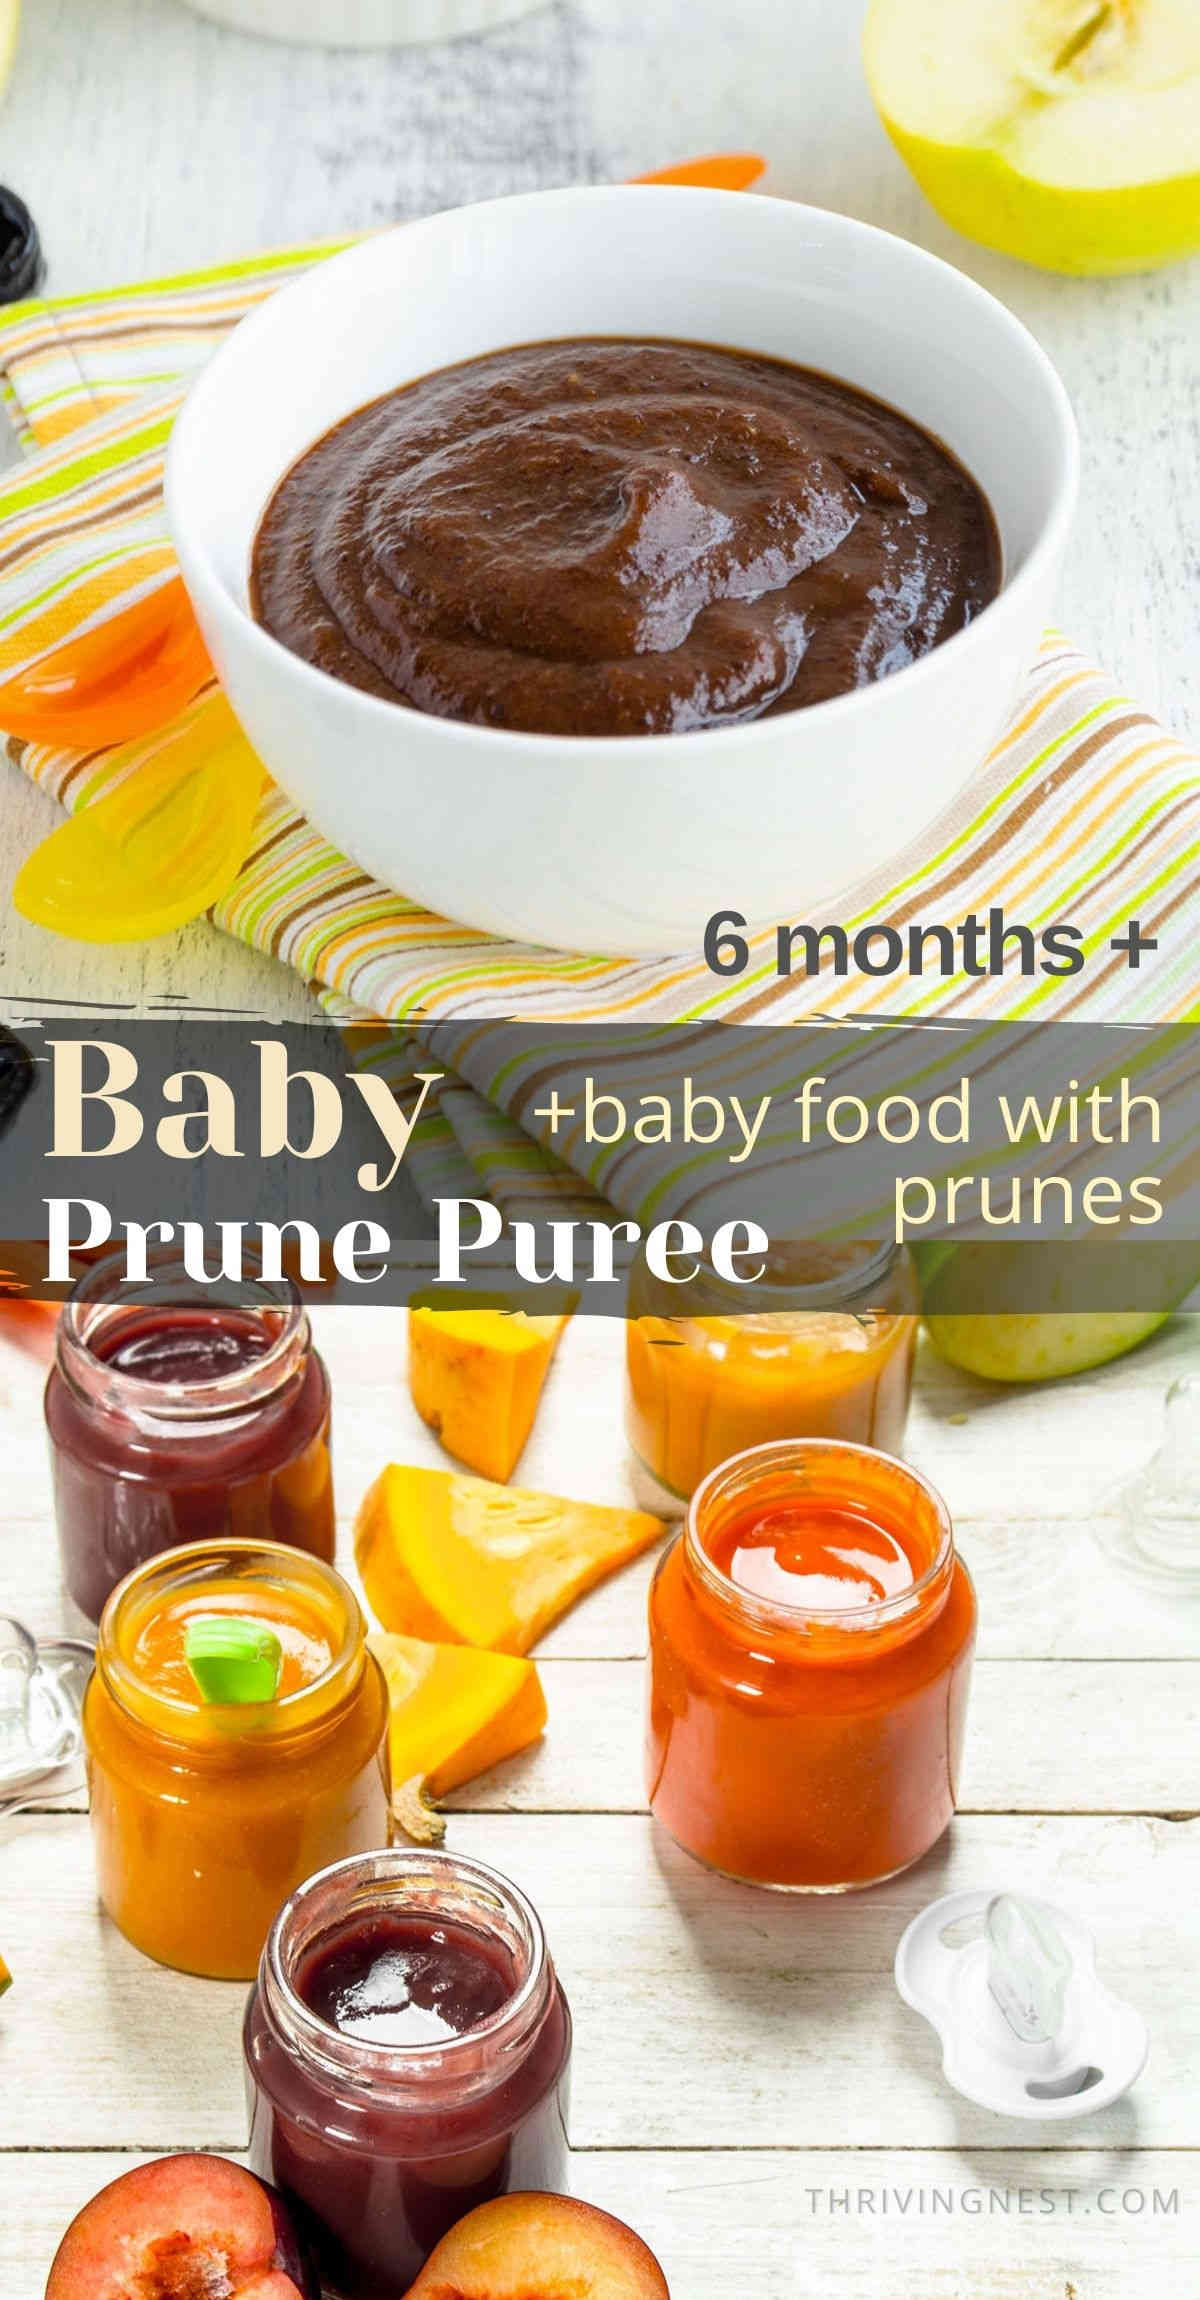 Prune Puree And Baby Food With Prunes for Babies 6 months and up.